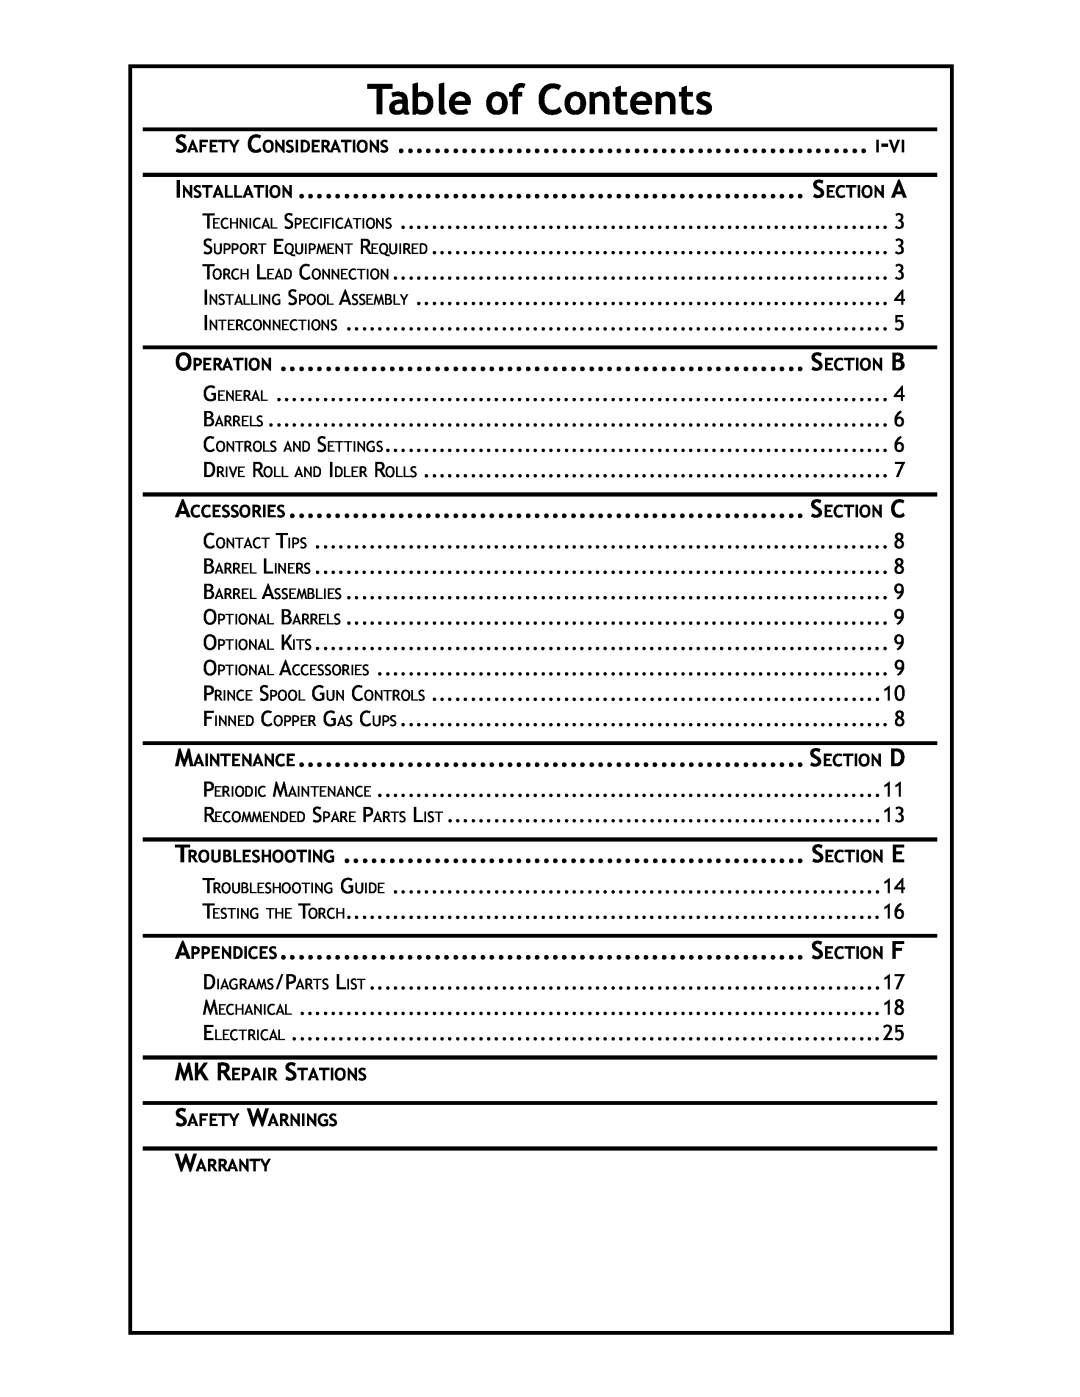 Lincoln Electric IM818 manual Table of Contents, Safety Considerations, Installation, Operation, Accessories, Maintenance 